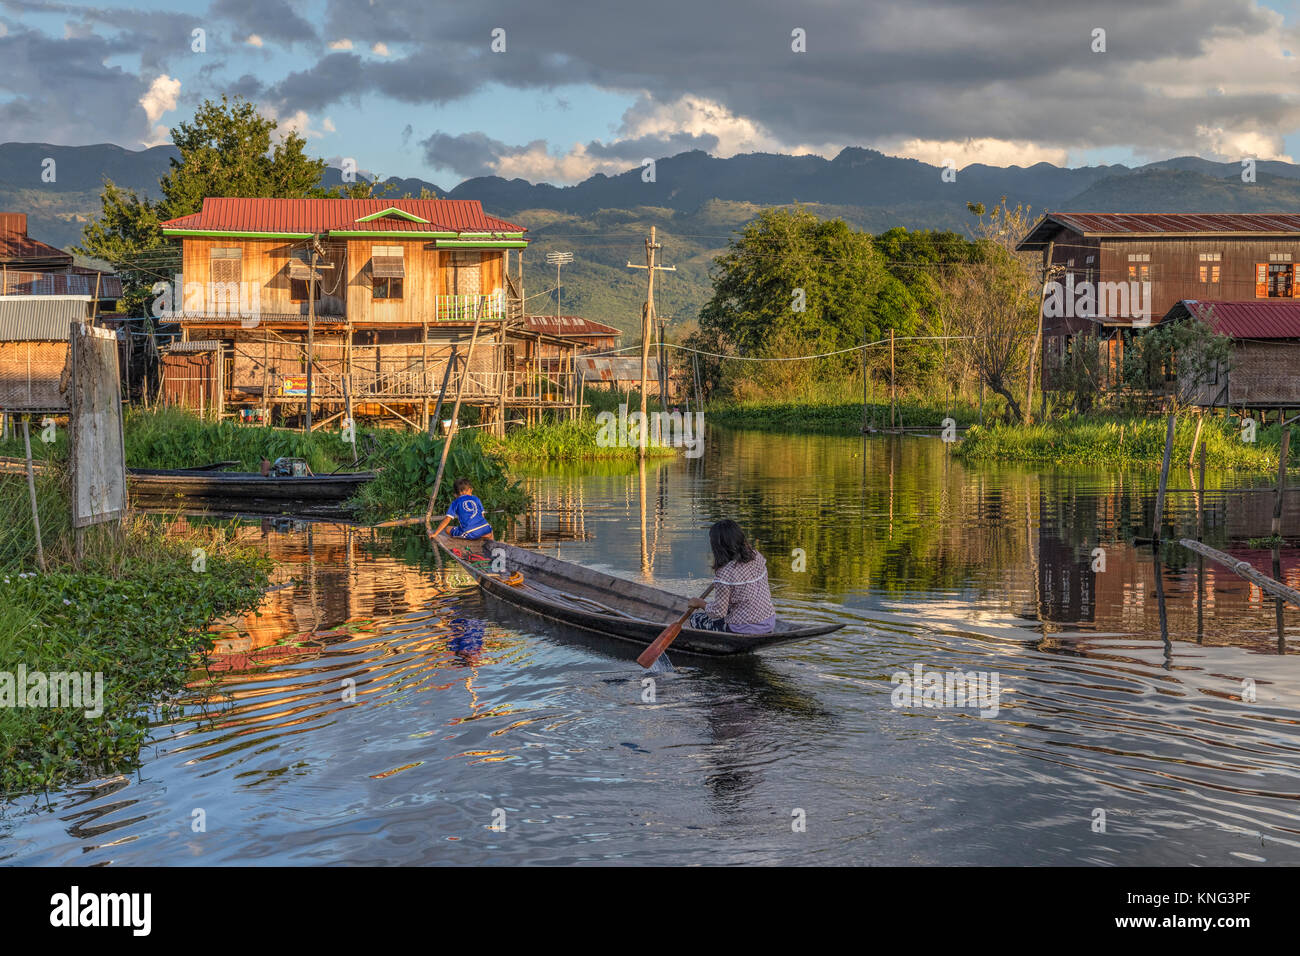 Lac Inle, Nyaung Shwe, le Myanmar, l'Asie Banque D'Images